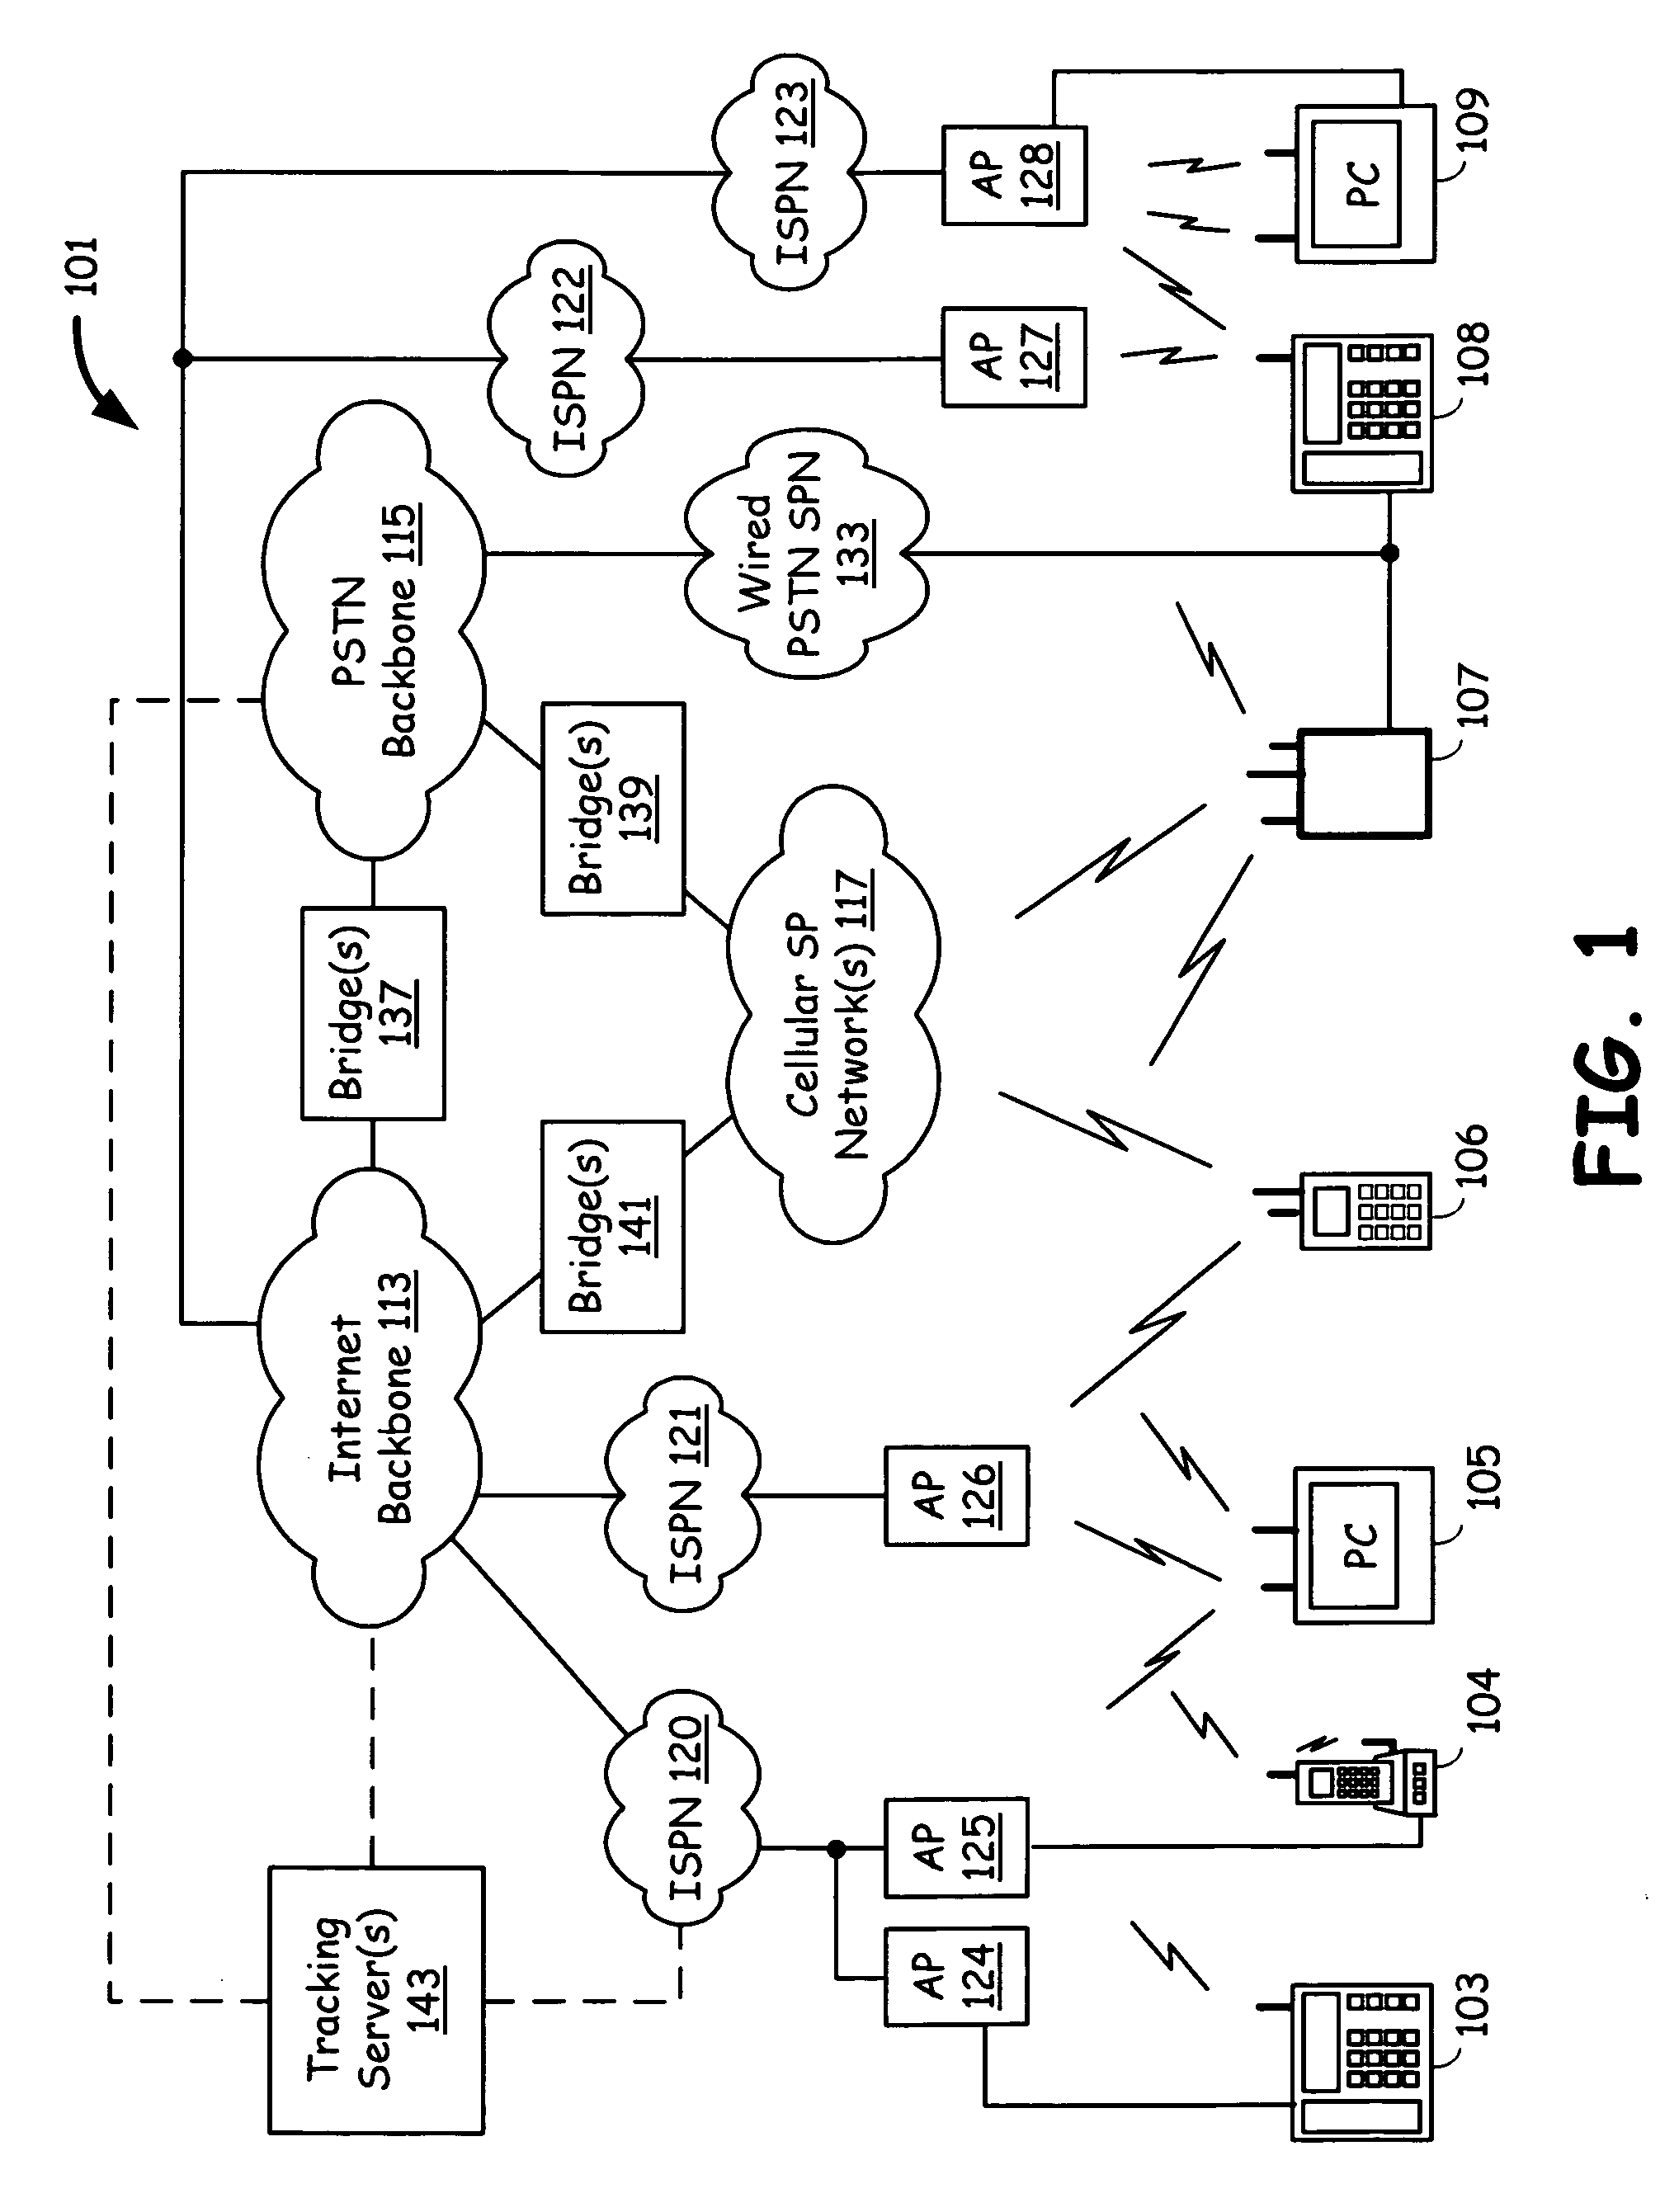 Voice communication device with PSTN and internet pathway analysis, selection and handoff